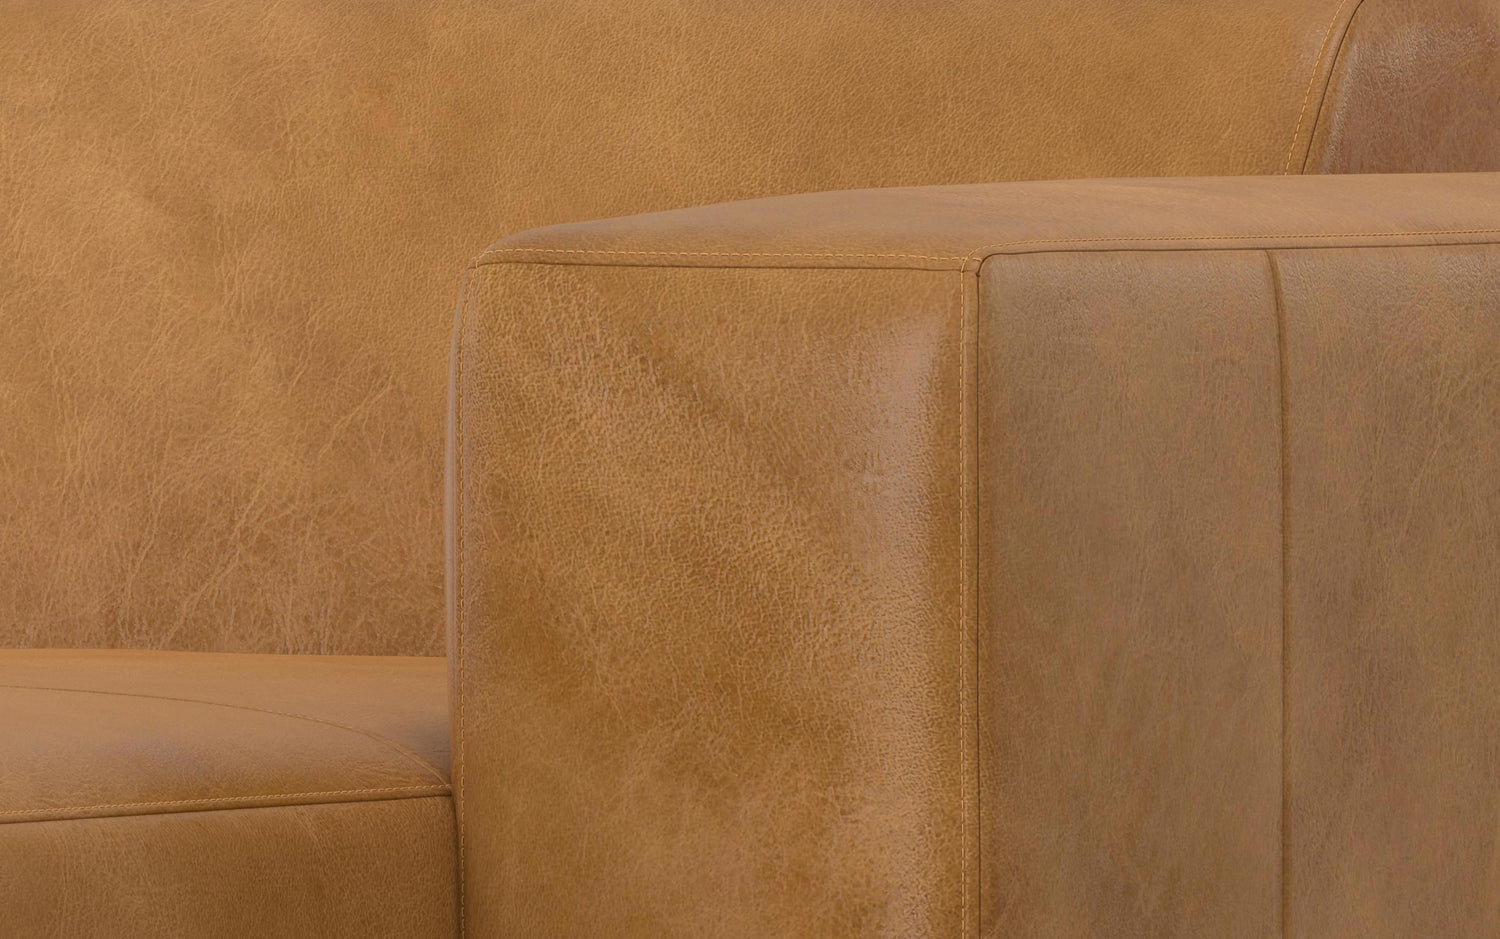 Sienna Genuine Leather | Rex 2 Seater Sofa and Right Chaise in Genuine Leather